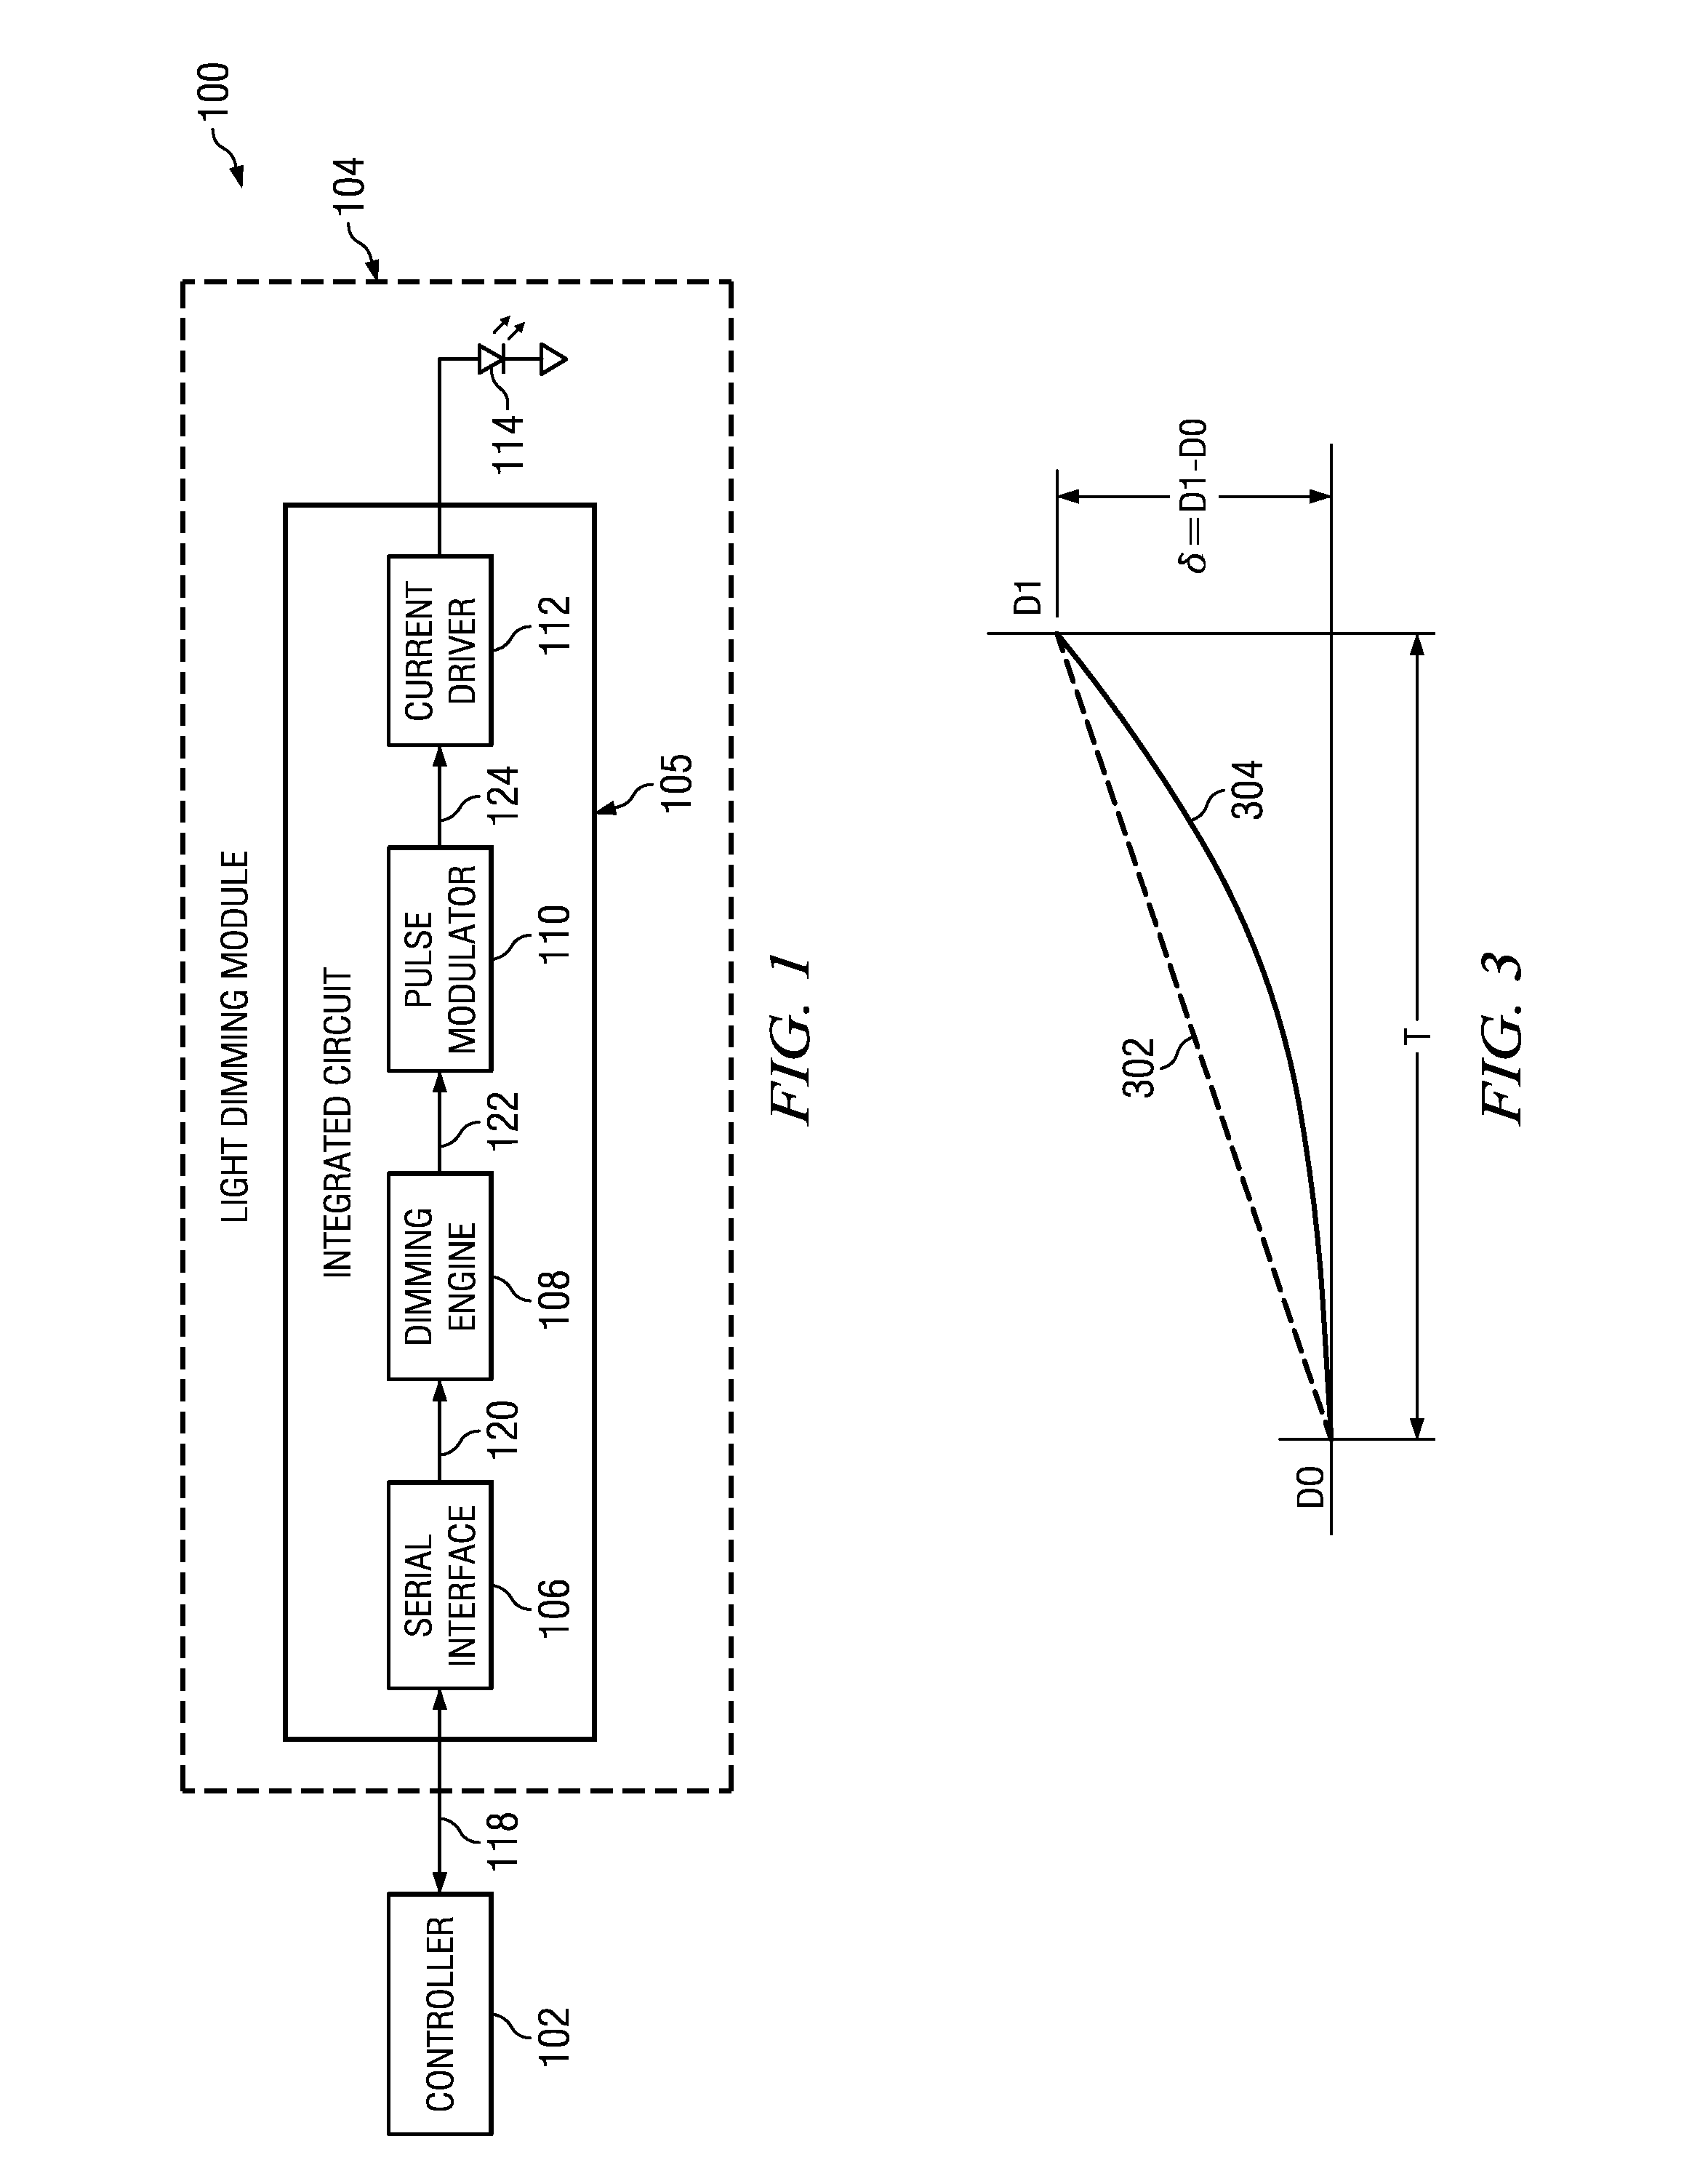 System and Method for Non-Linear Dimming of a Light Source